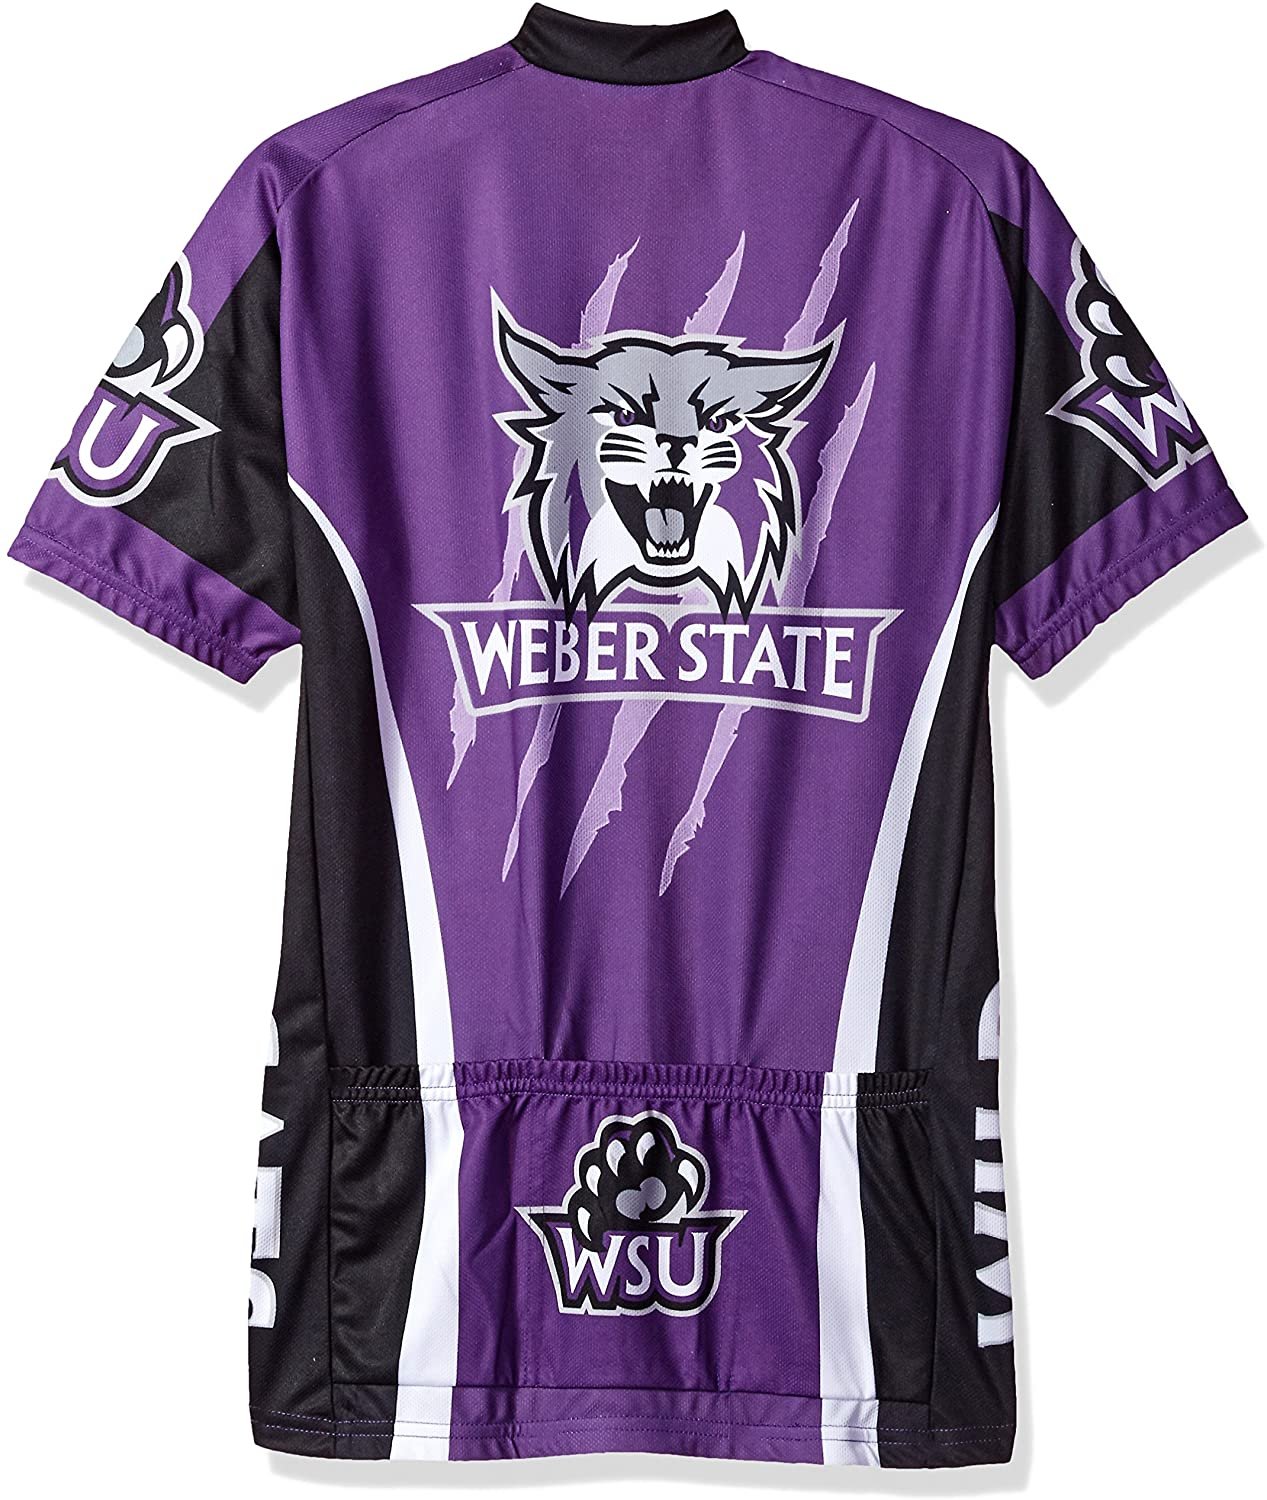 Weber State Wildcats Men's Road Jersey, X-Large